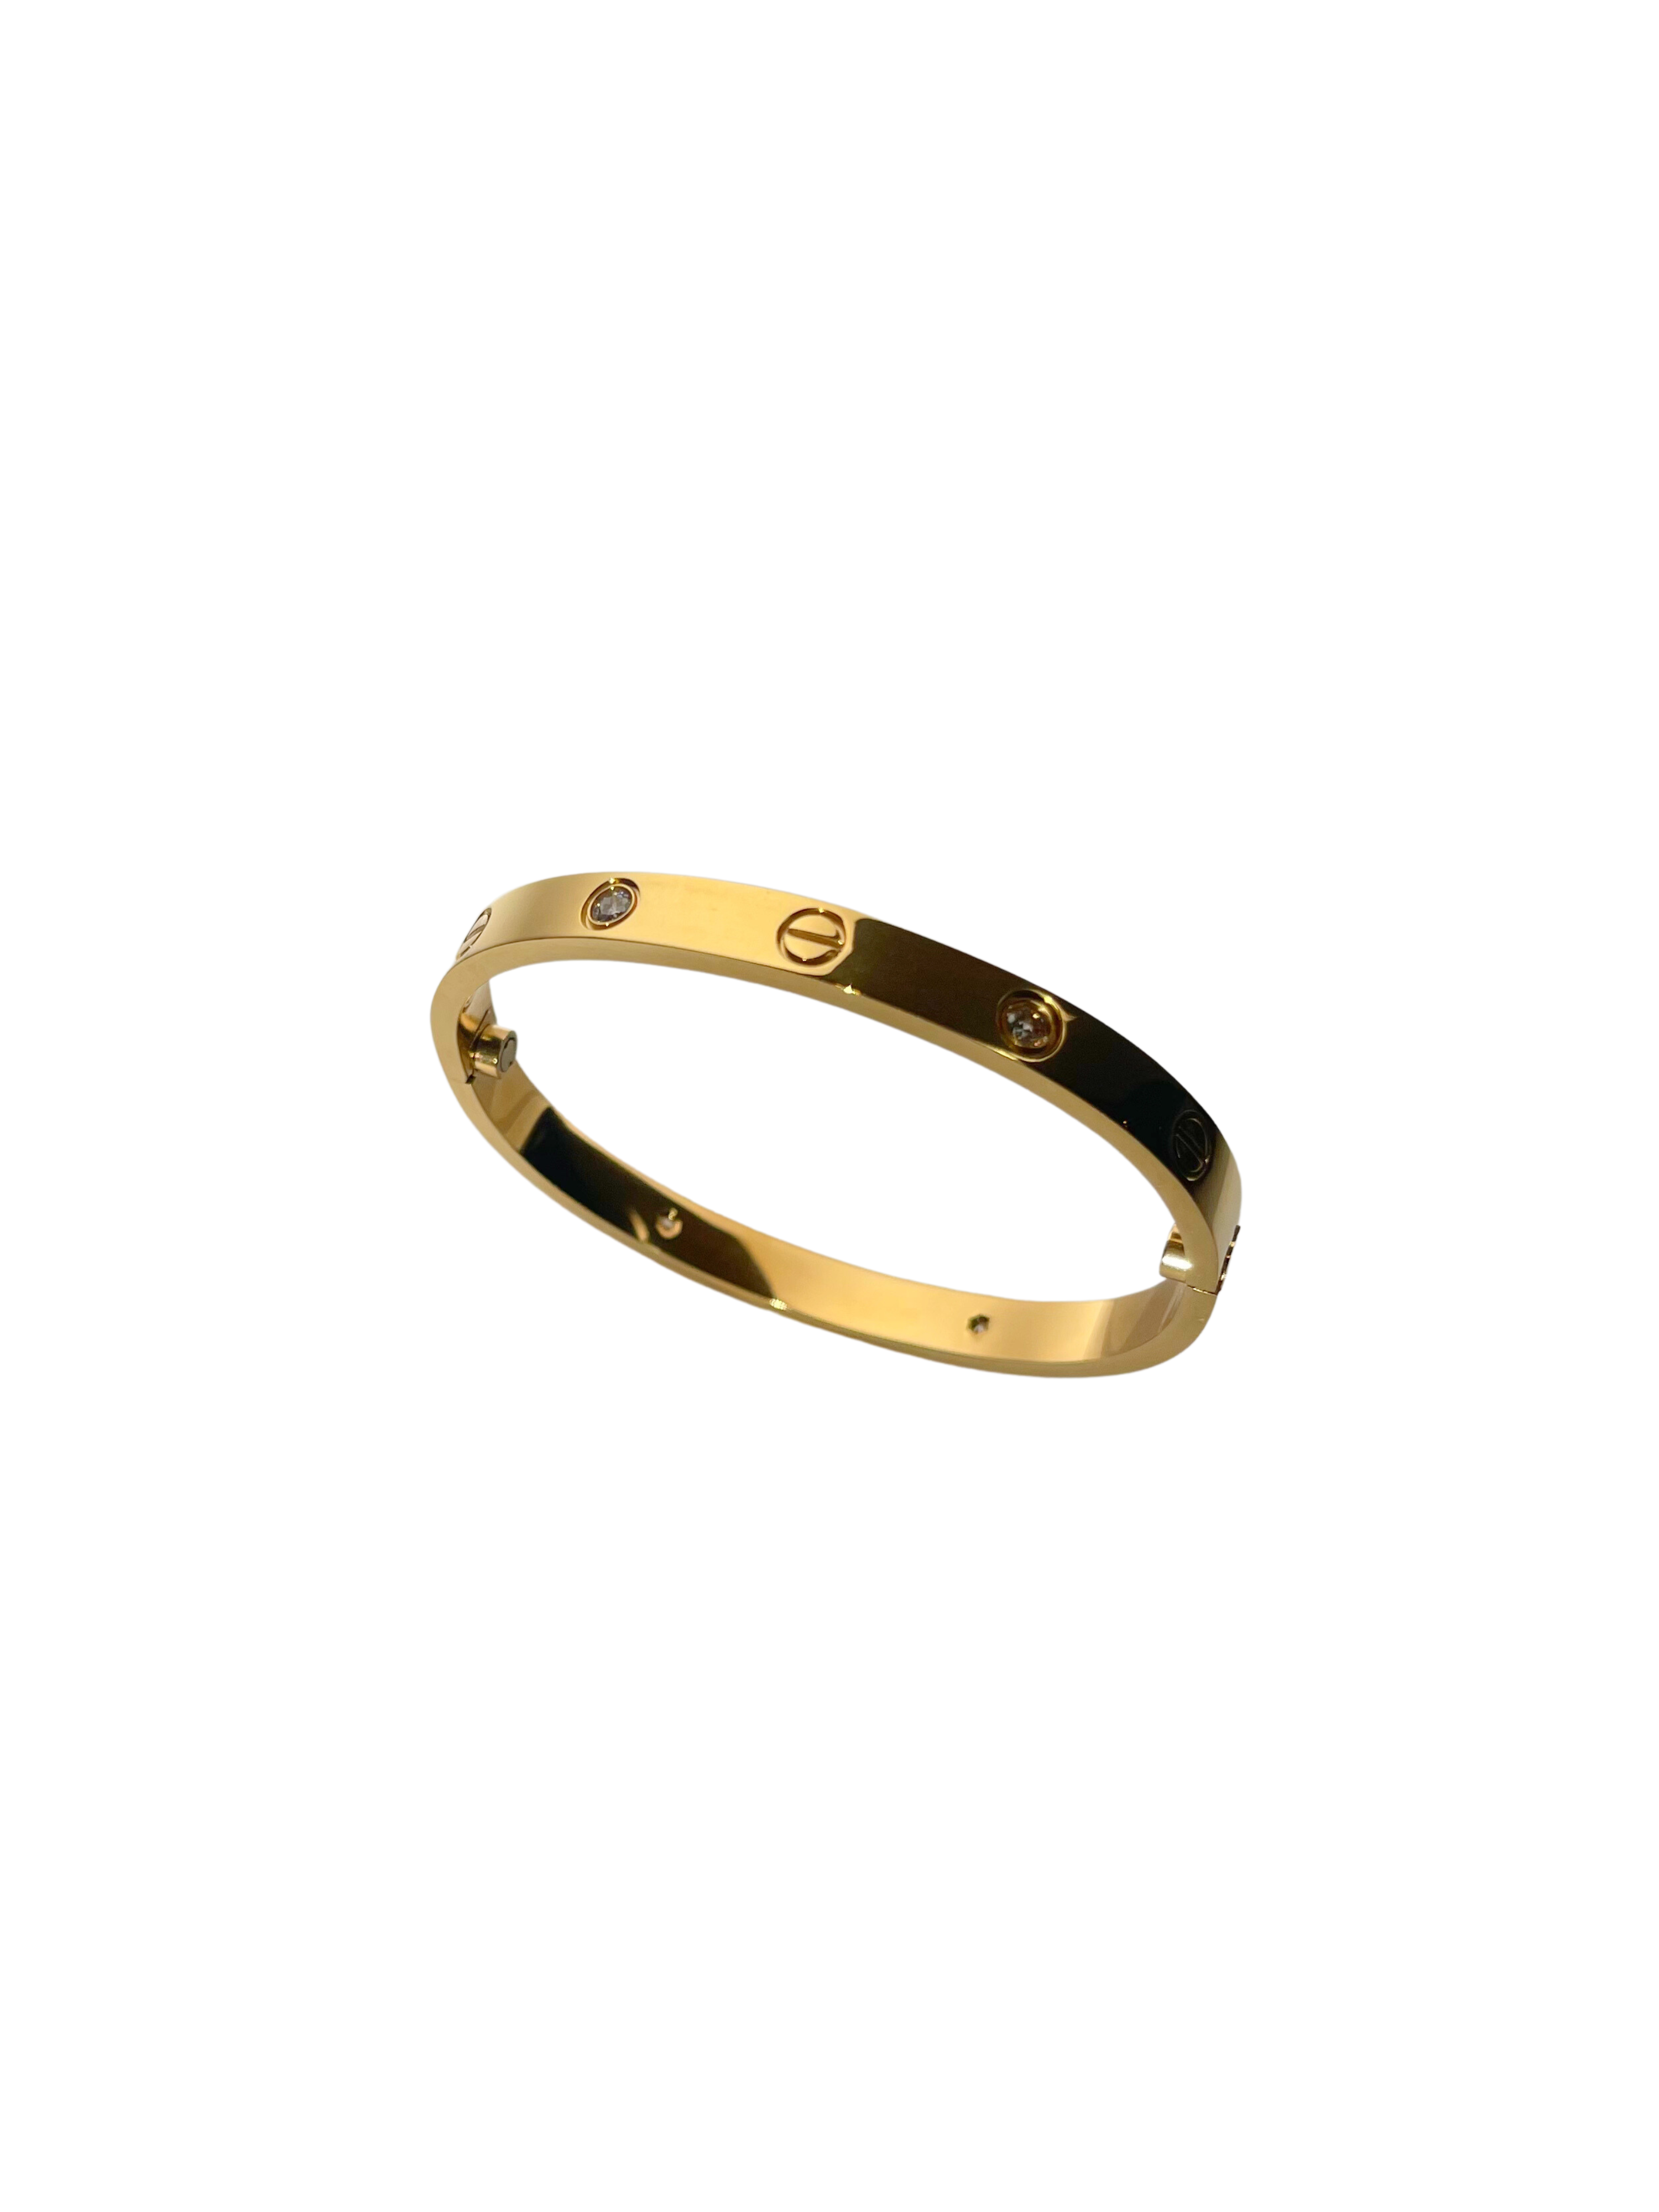 GOLDxTEAL gold plated stainless steel infinity bracelet.